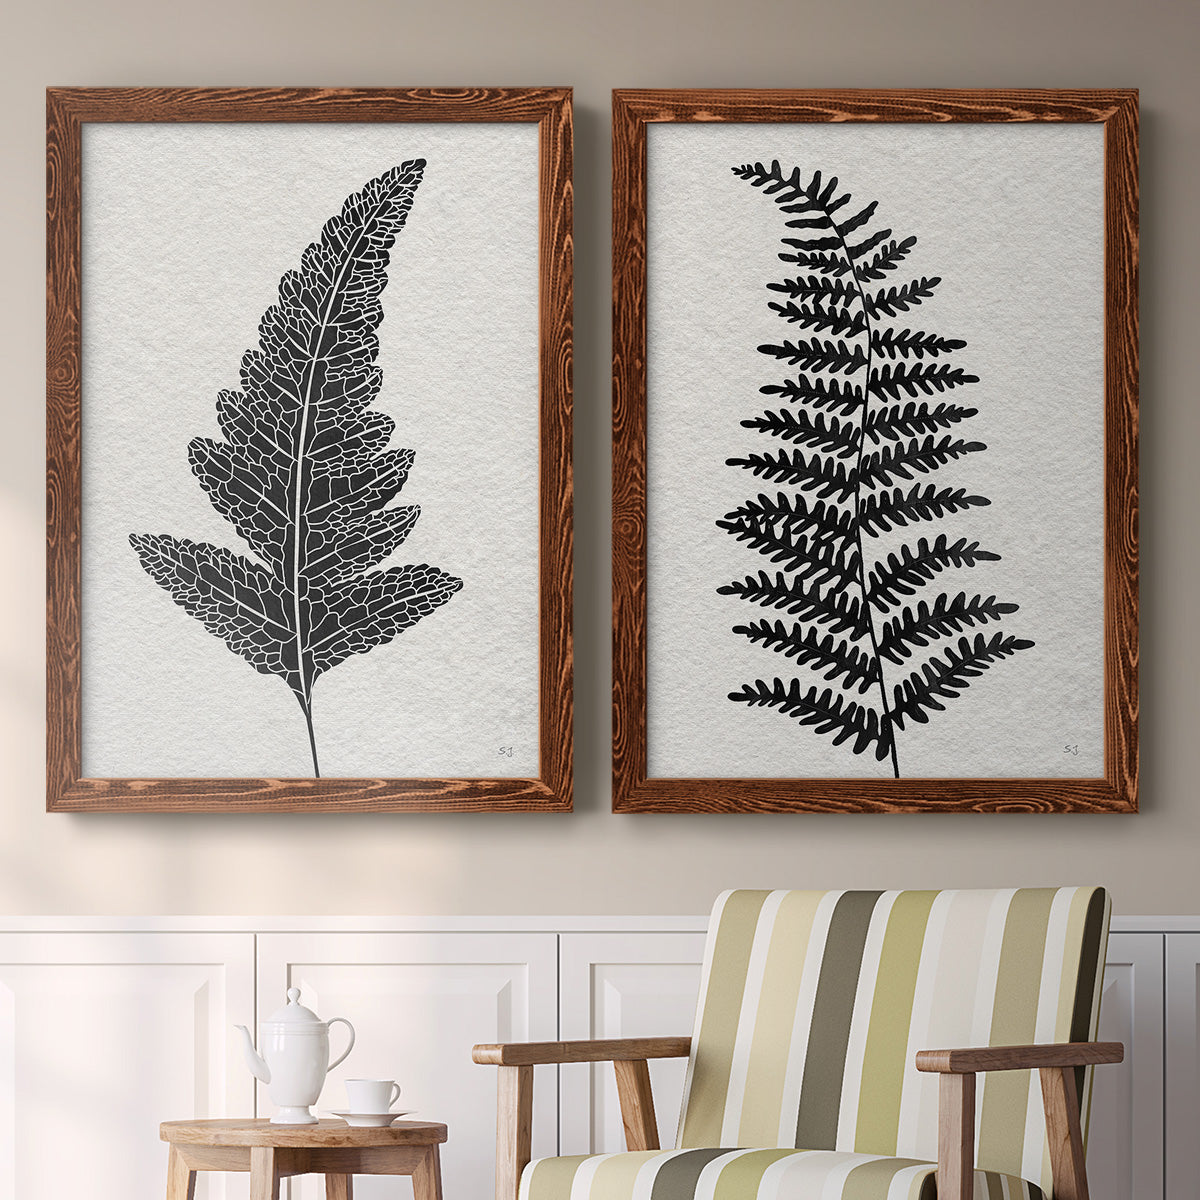 Forest Fern I - Premium Framed Canvas 2 Piece Set - Ready to Hang